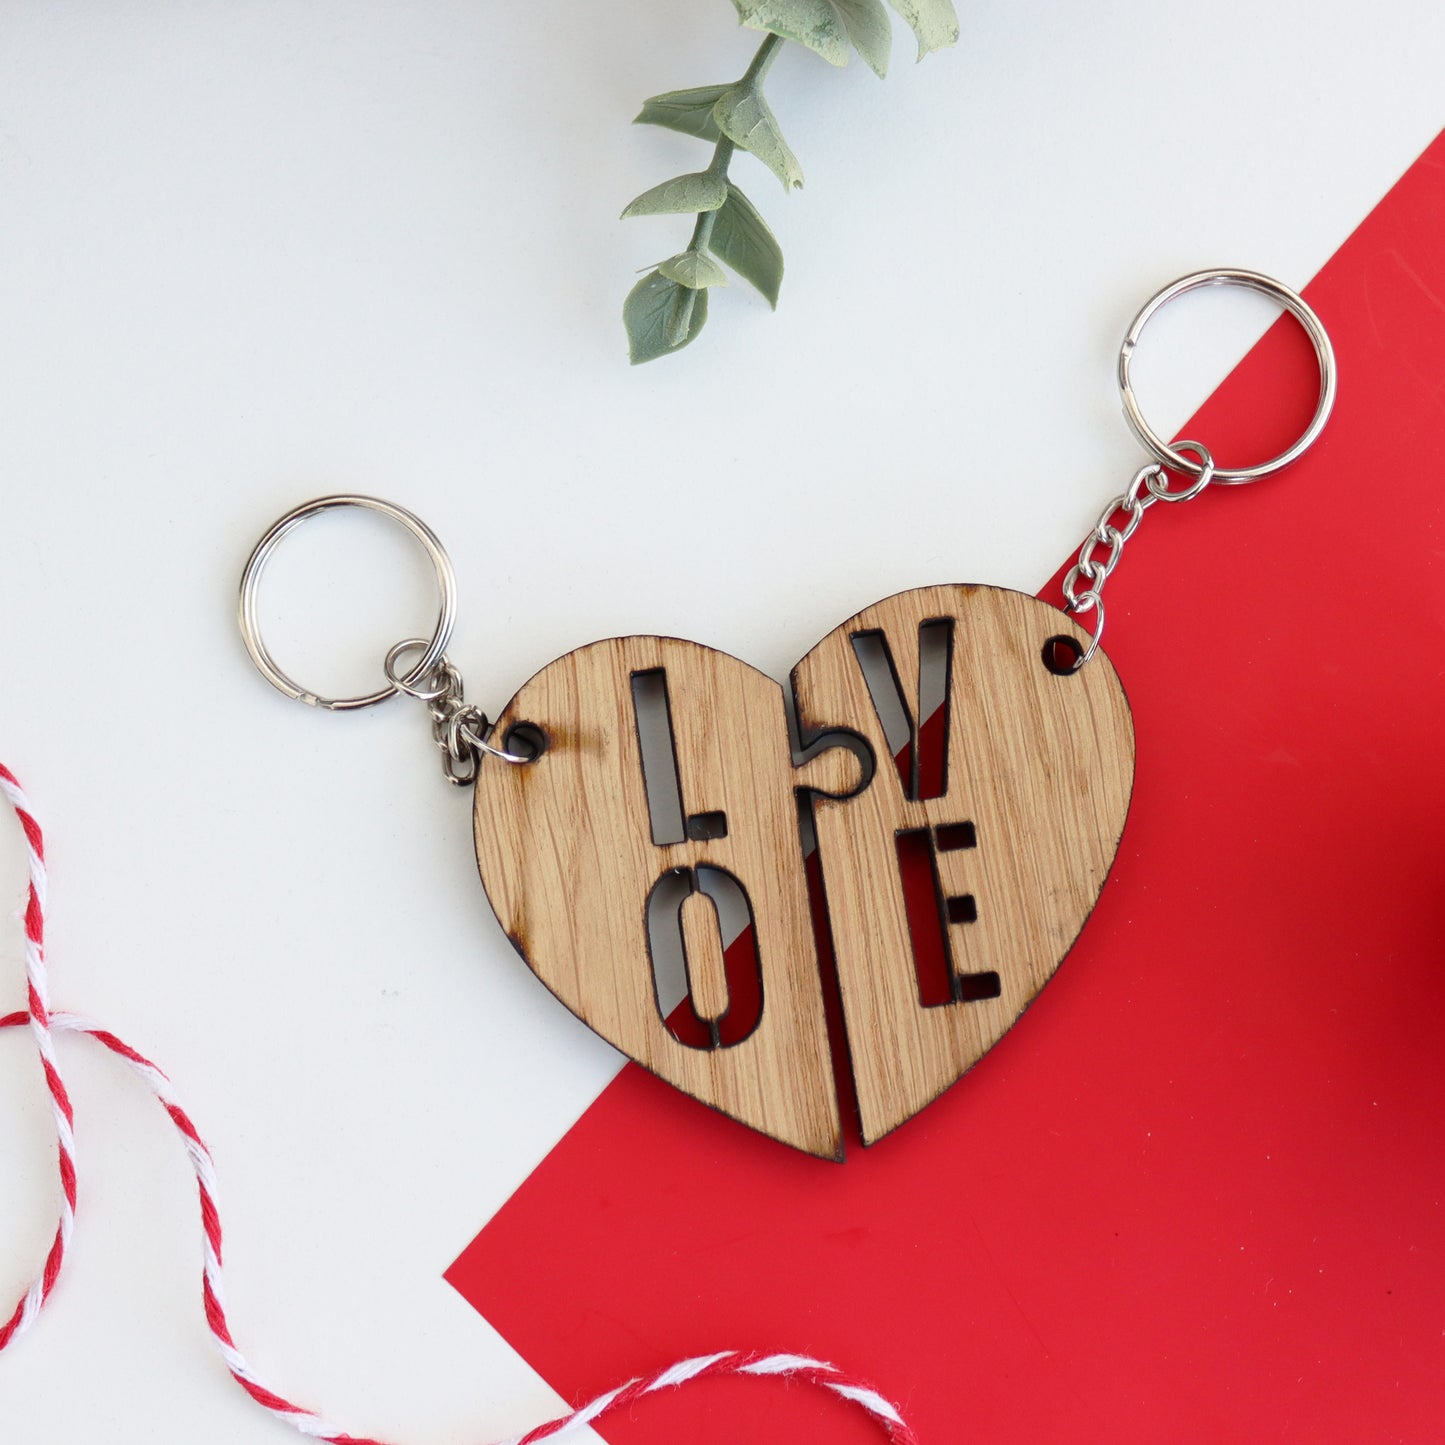 heart keyring split into with LOVE written between the two couples keyring set on simple white and red background